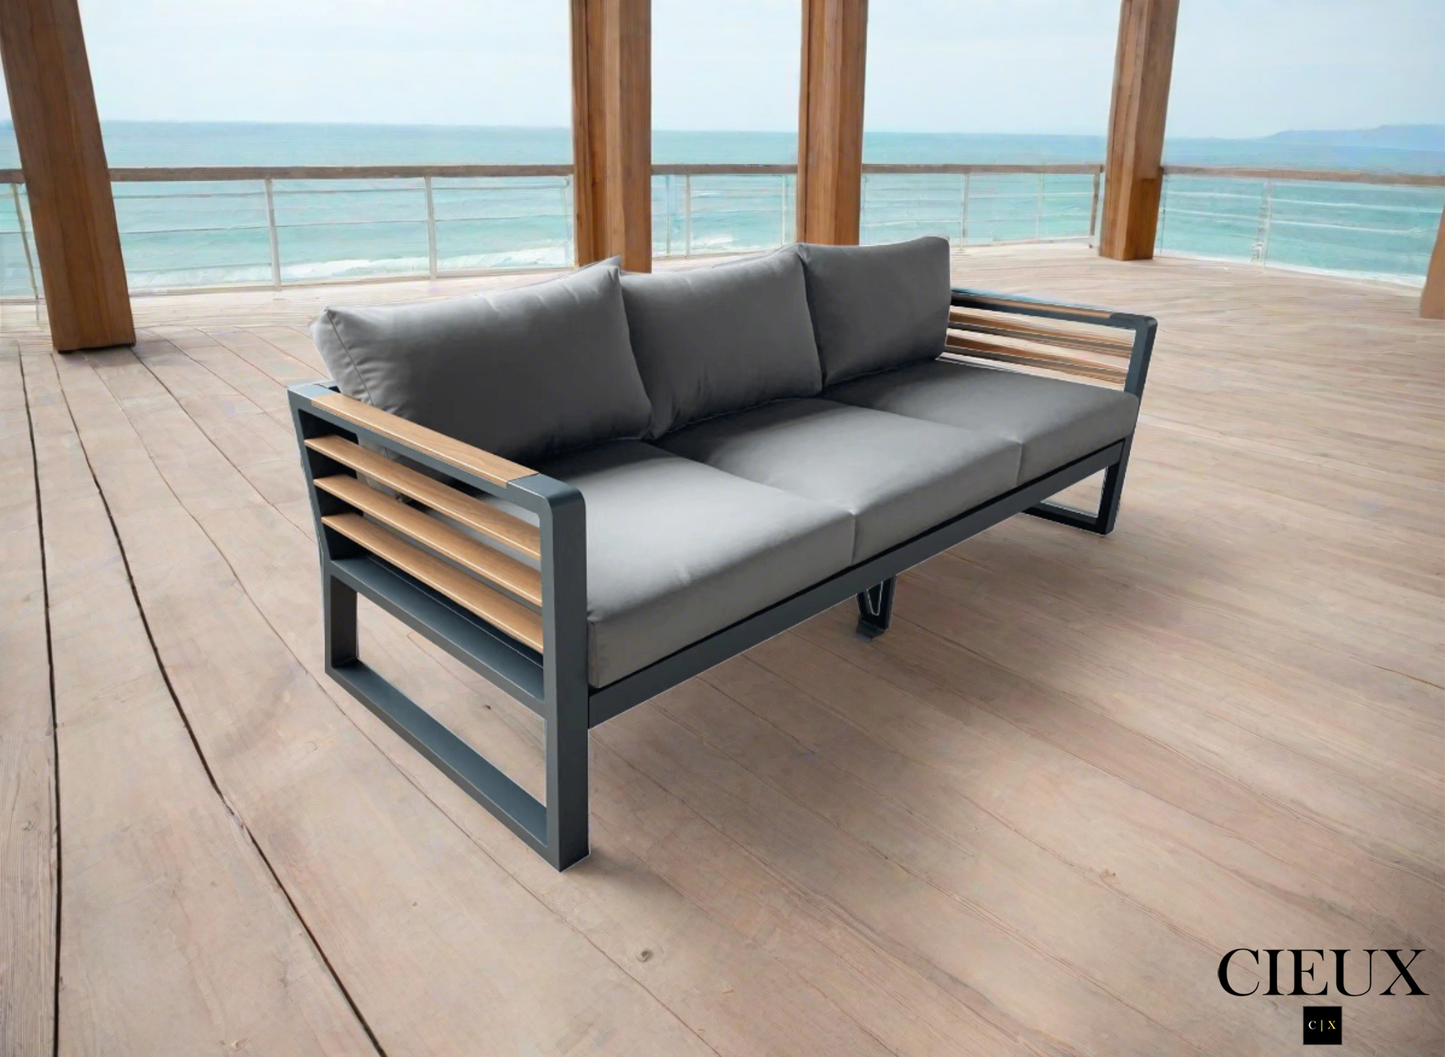 Avignon Outdoor Patio Aluminum Metal Sofa in Midnight Grey with Sunbrella Cushions - Available in 2 Colours